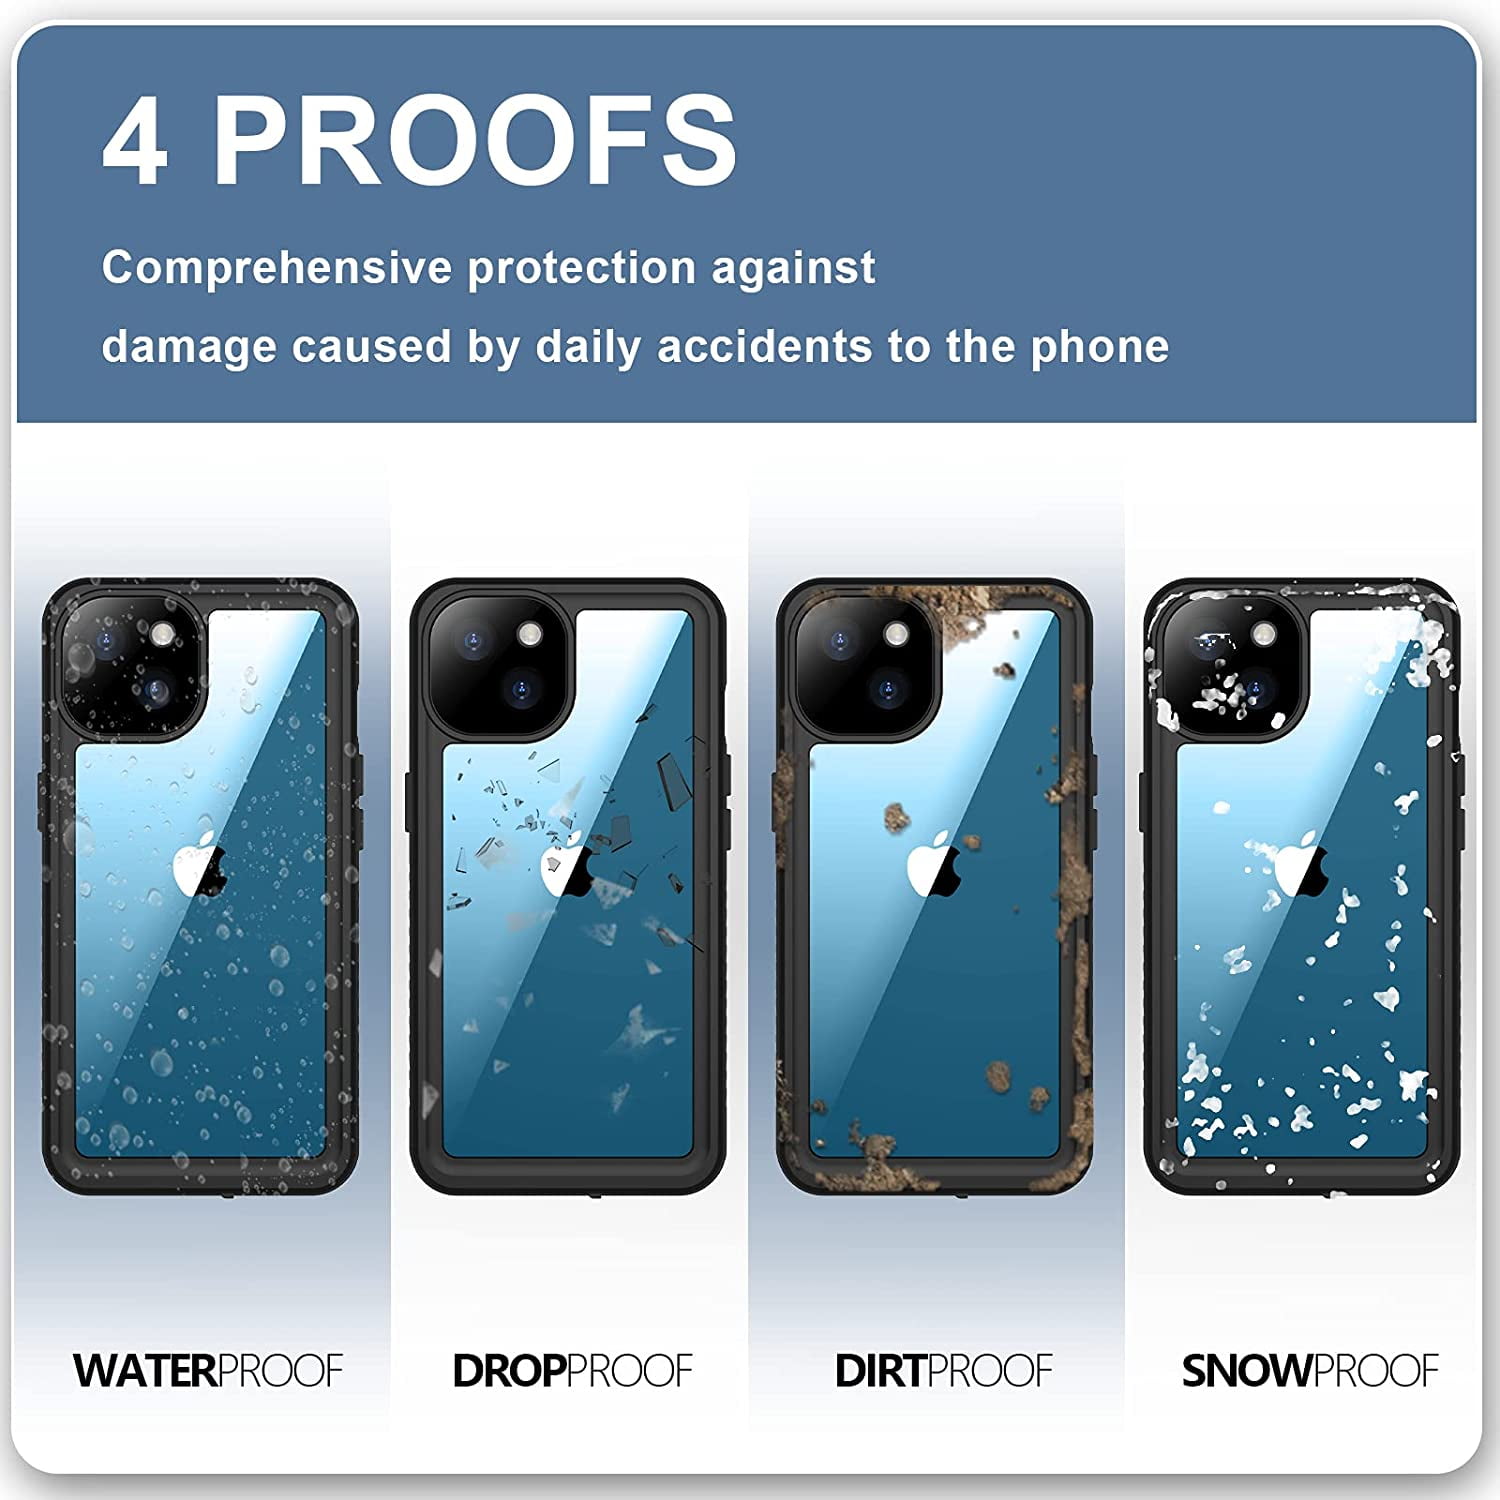 Transy Waterproof iPhone 12 Pro Max 6.7 Black Rugged Bumper Case - IP68  Full Body Protection & Built-in Screen Protector